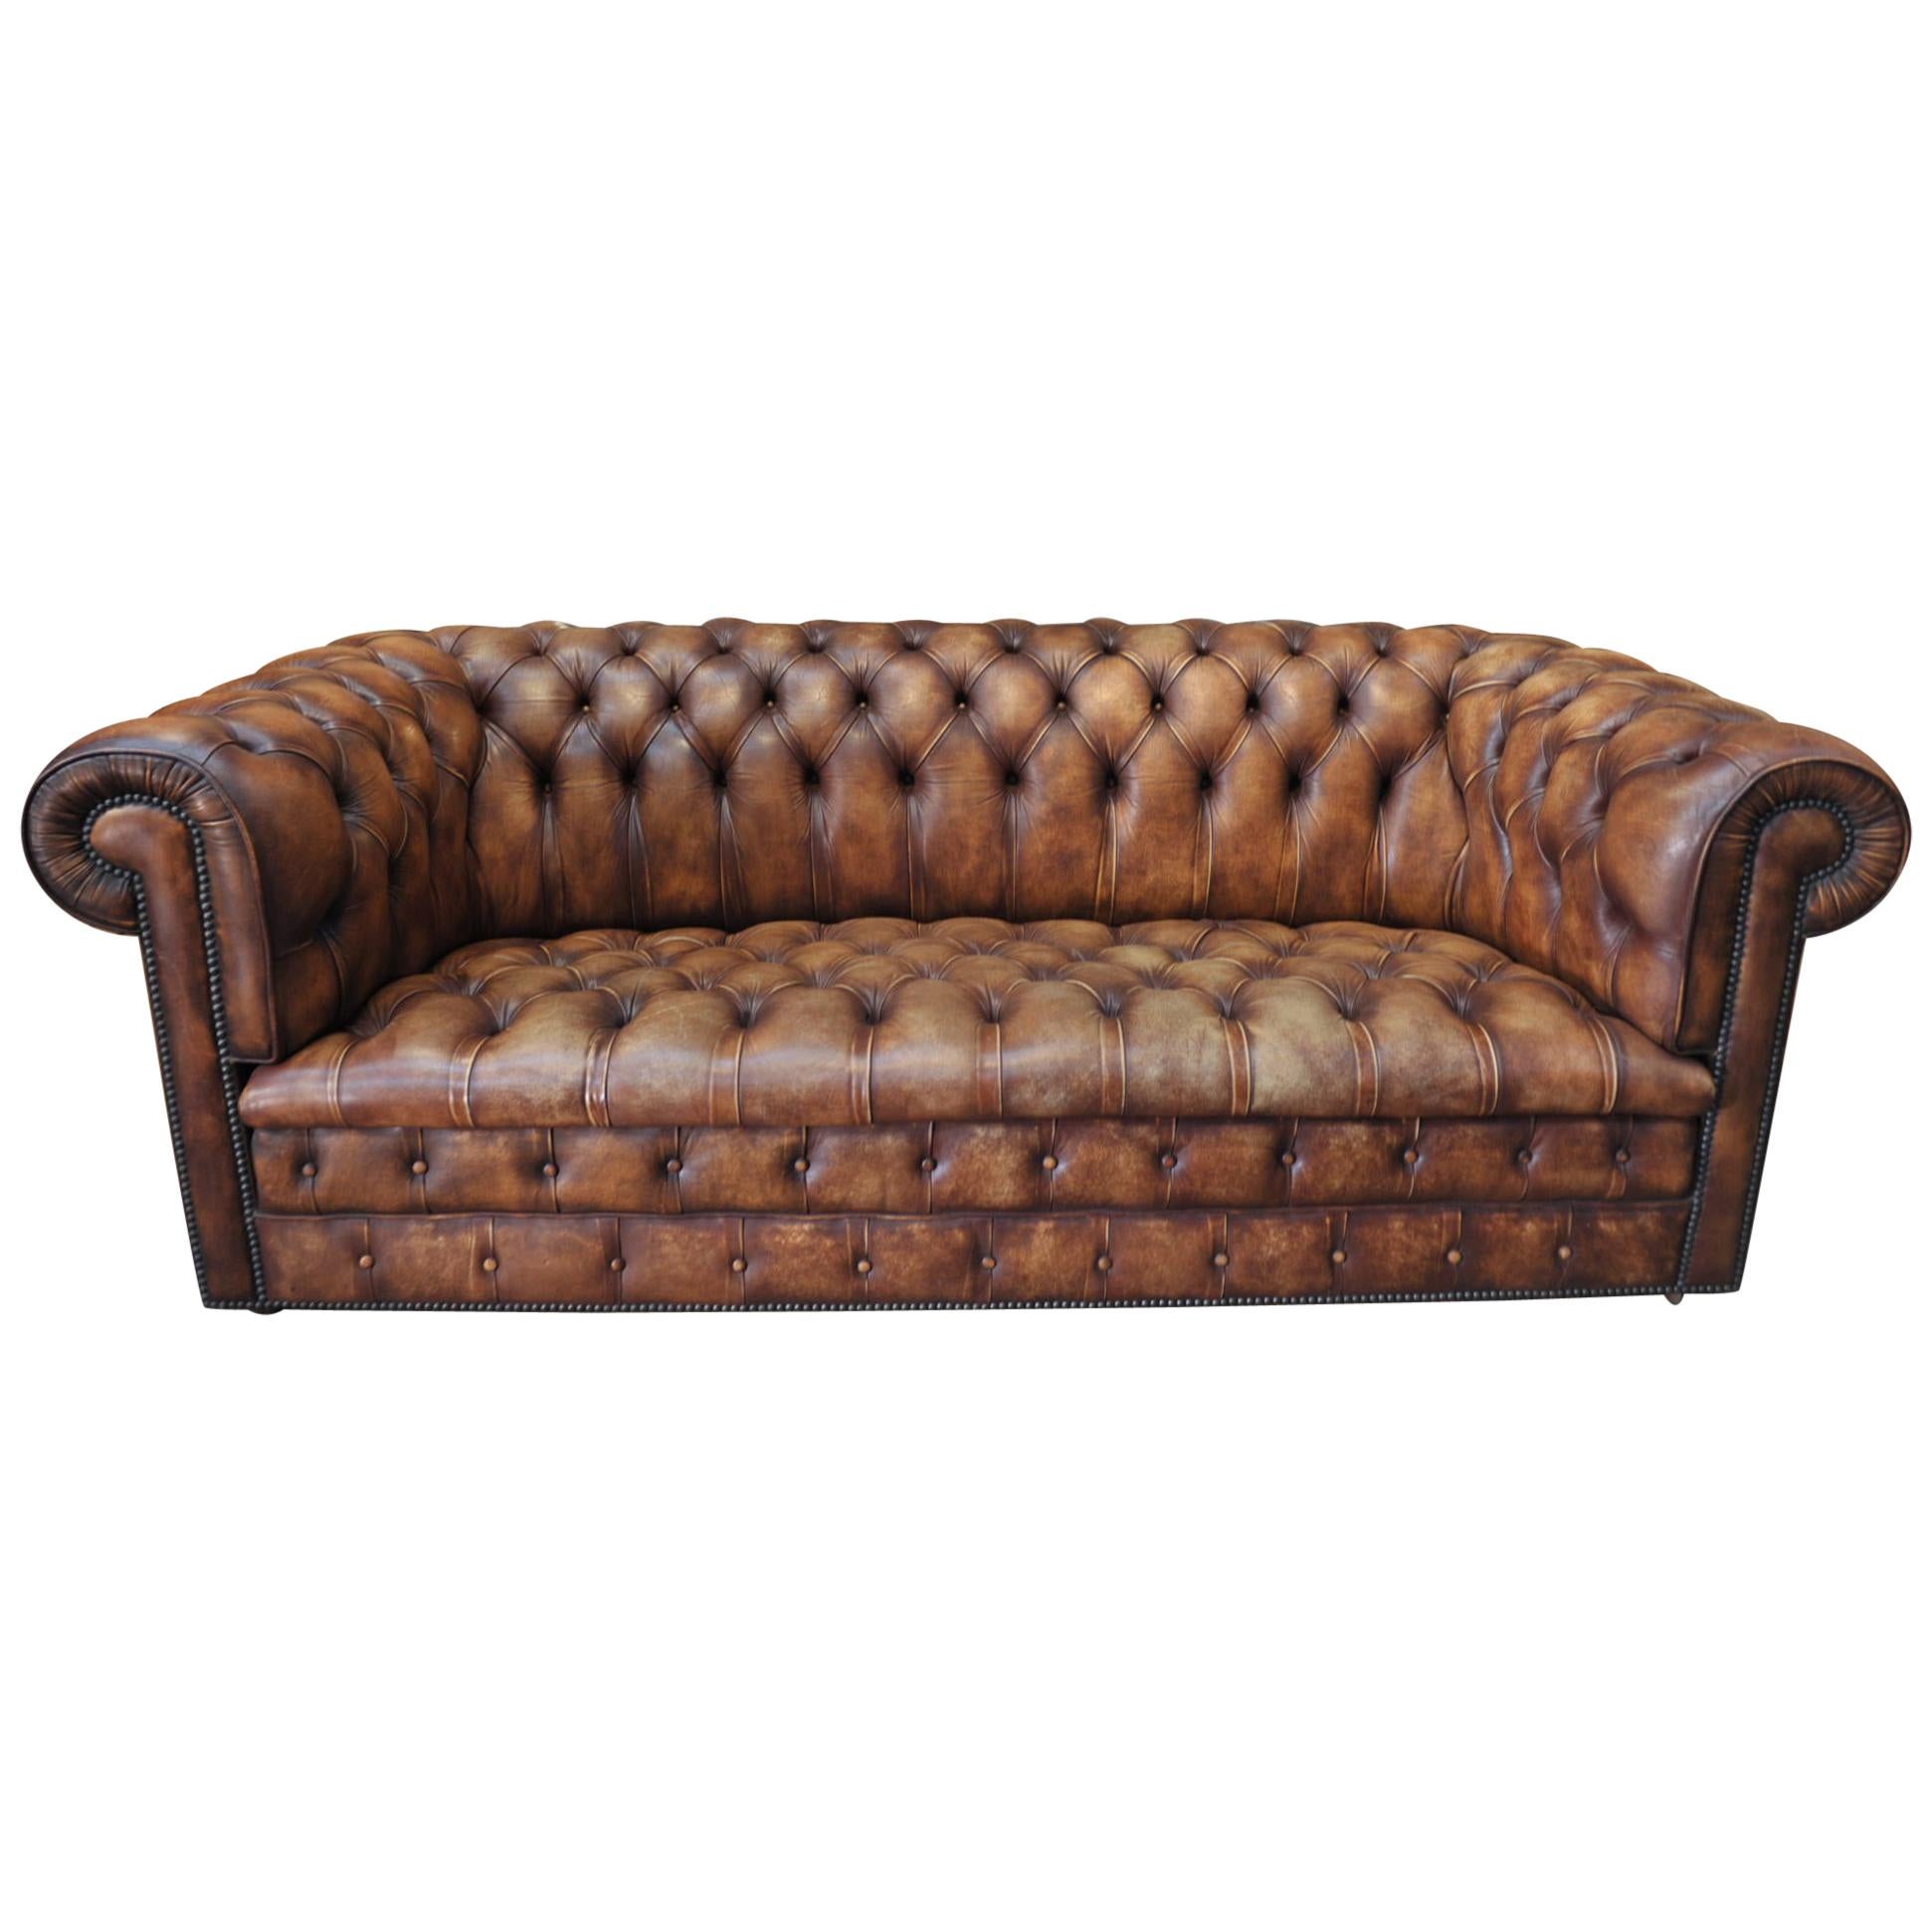 Leather Chesterfield Sofa circa 1970 from "KENRICK made in England"